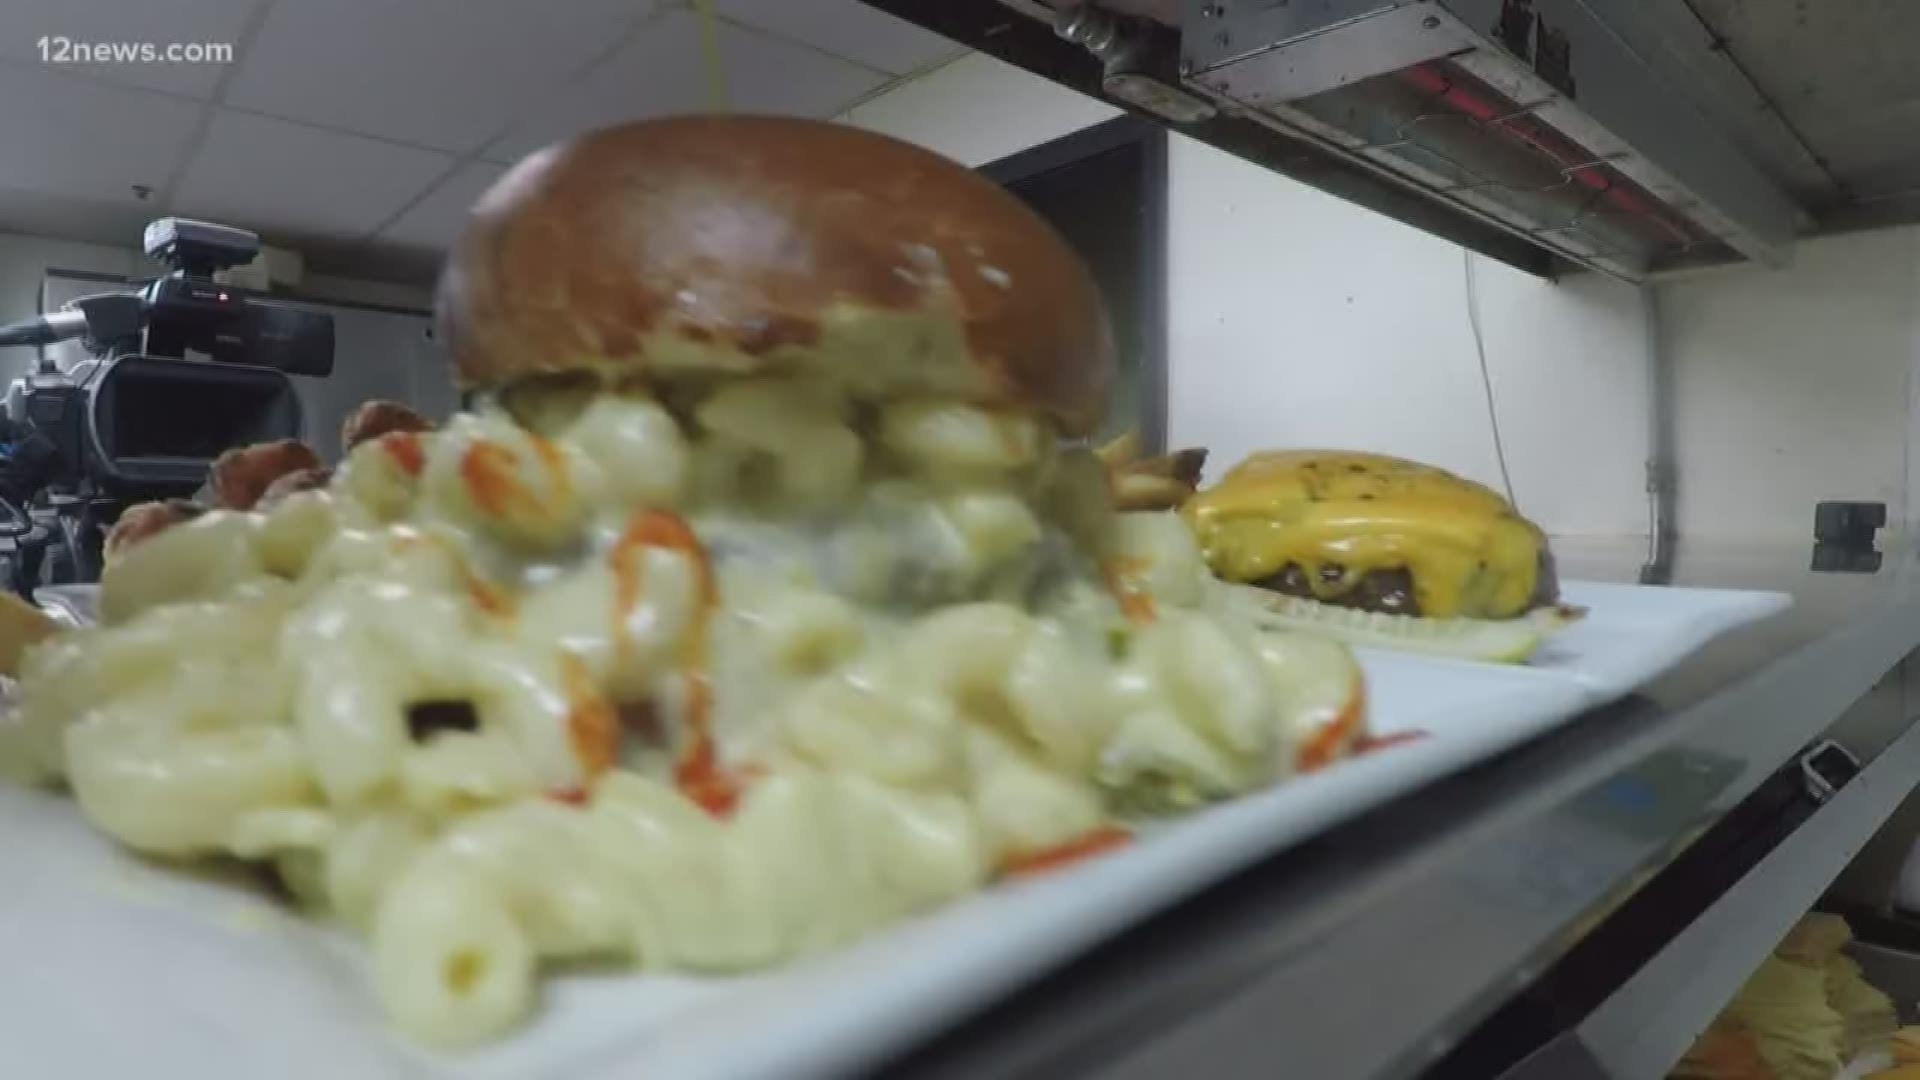 The home of the San Francisco Giants is cooking up everyone's favorite grill grub and sack lunch sandwich. We go inside Rehab Burger Therapy for a unique twist on burgers for spring training.